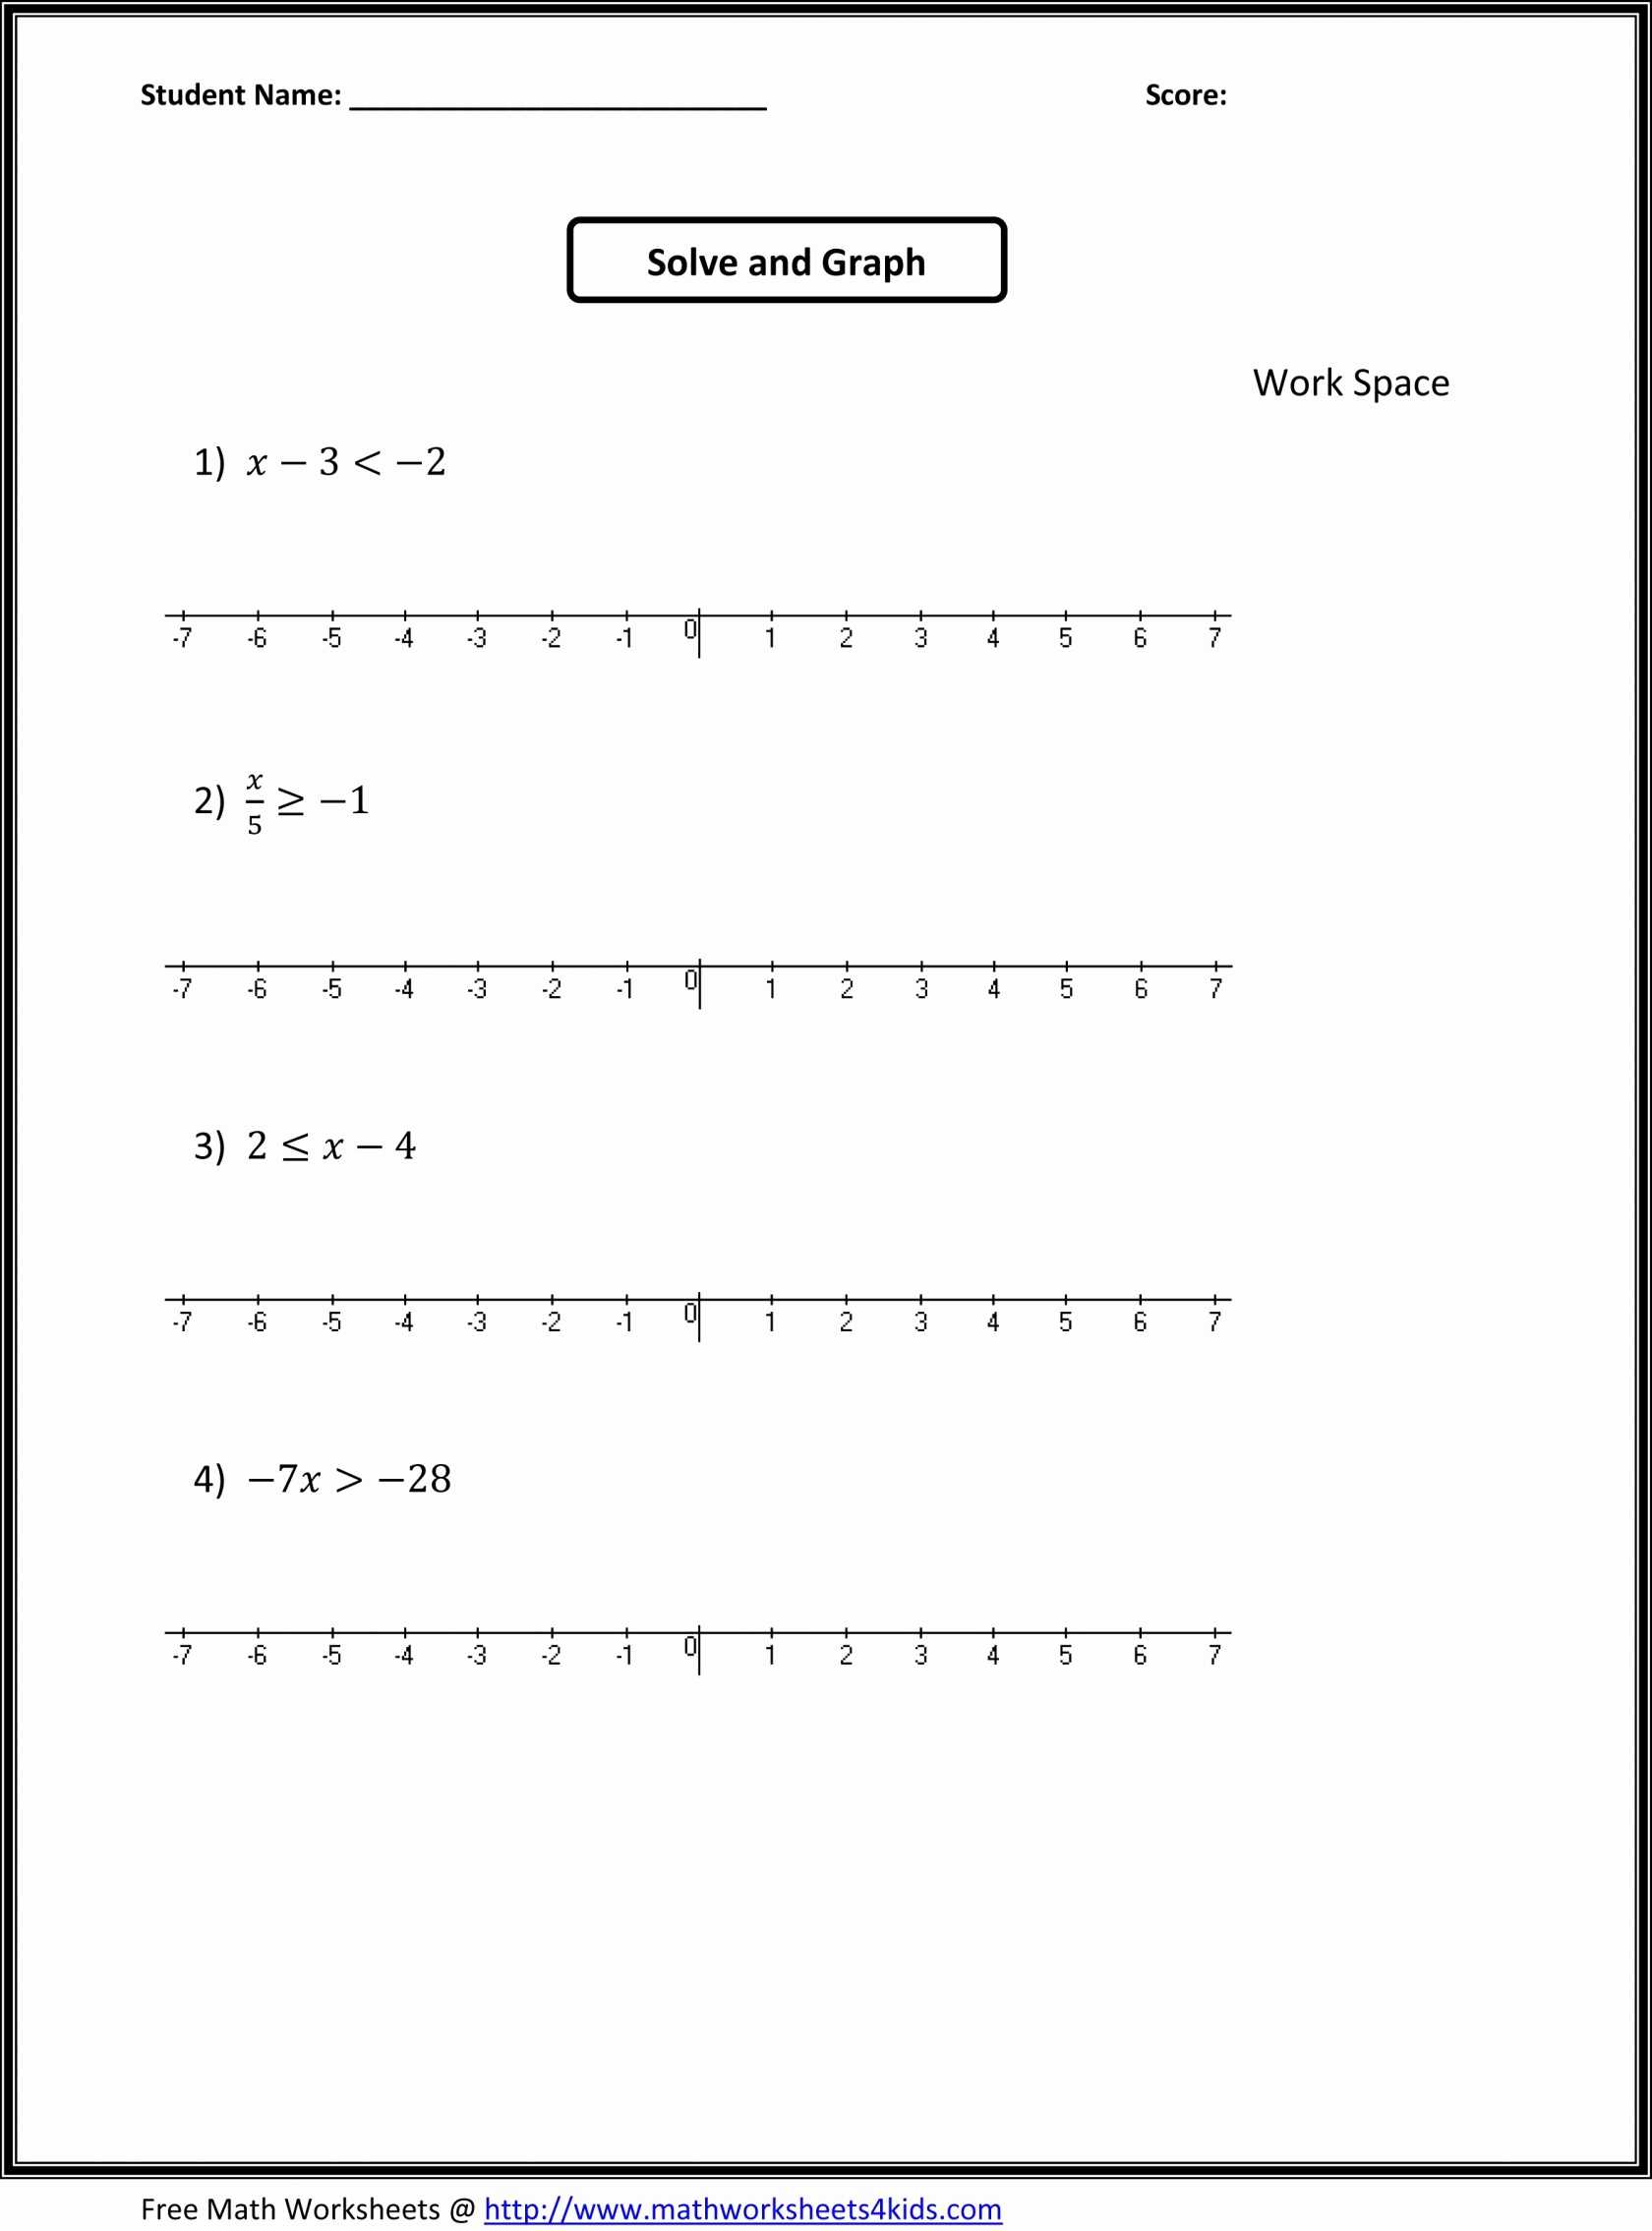 Ratio Tables Worksheets together with Ratio and Proportion Worksheet Pdf Image Collections Worksheet